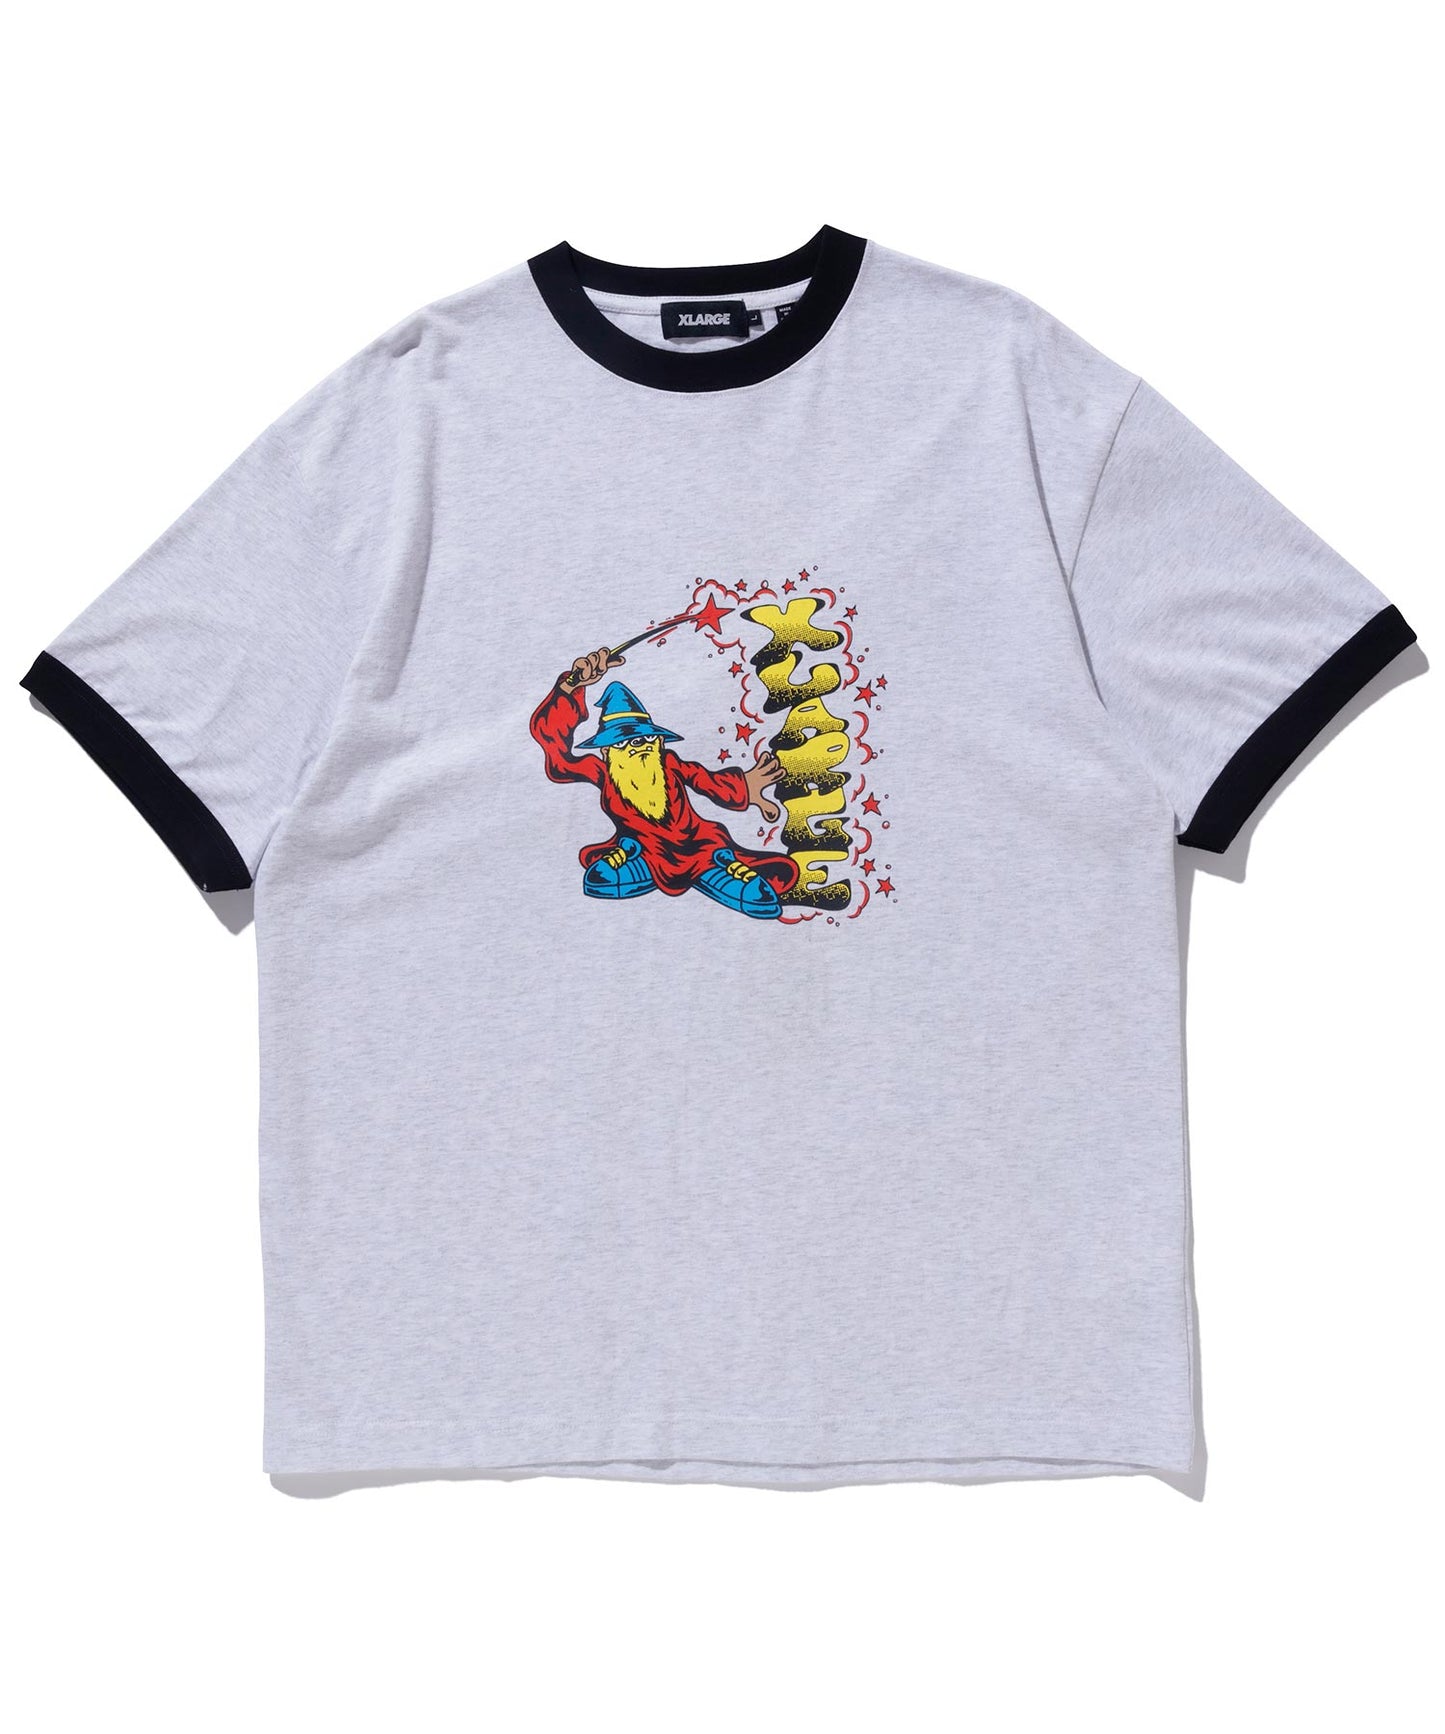 WAVE THE MAGIC WAND RINGER S/S TEE